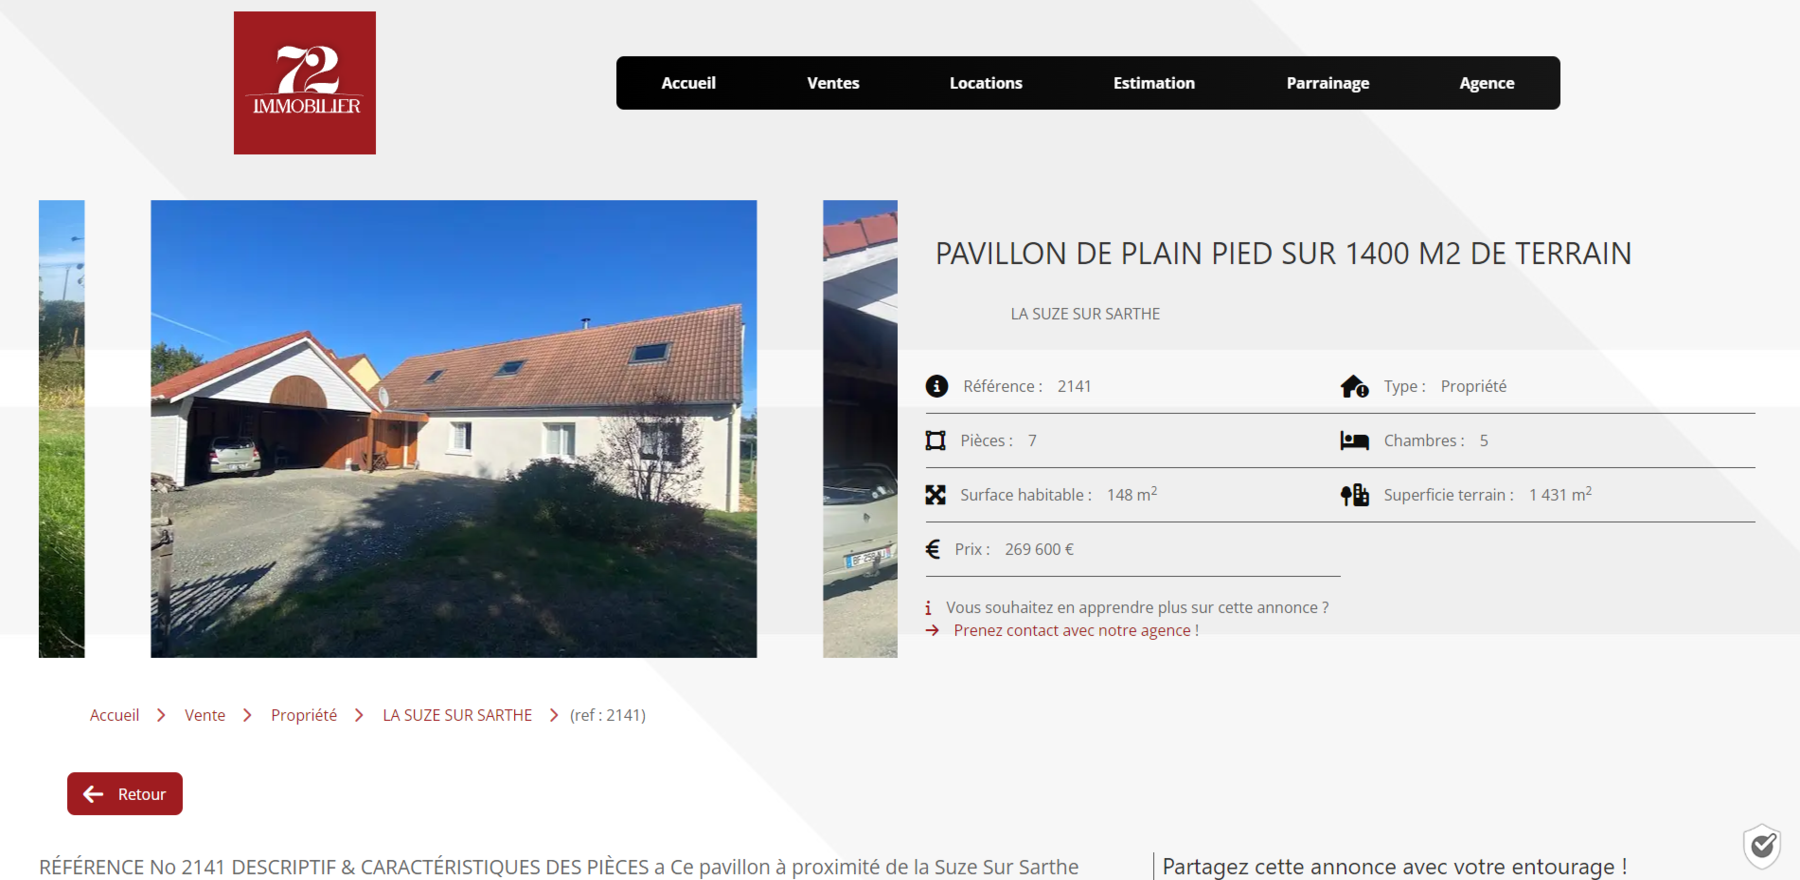 Image d'exemple 72immobilier